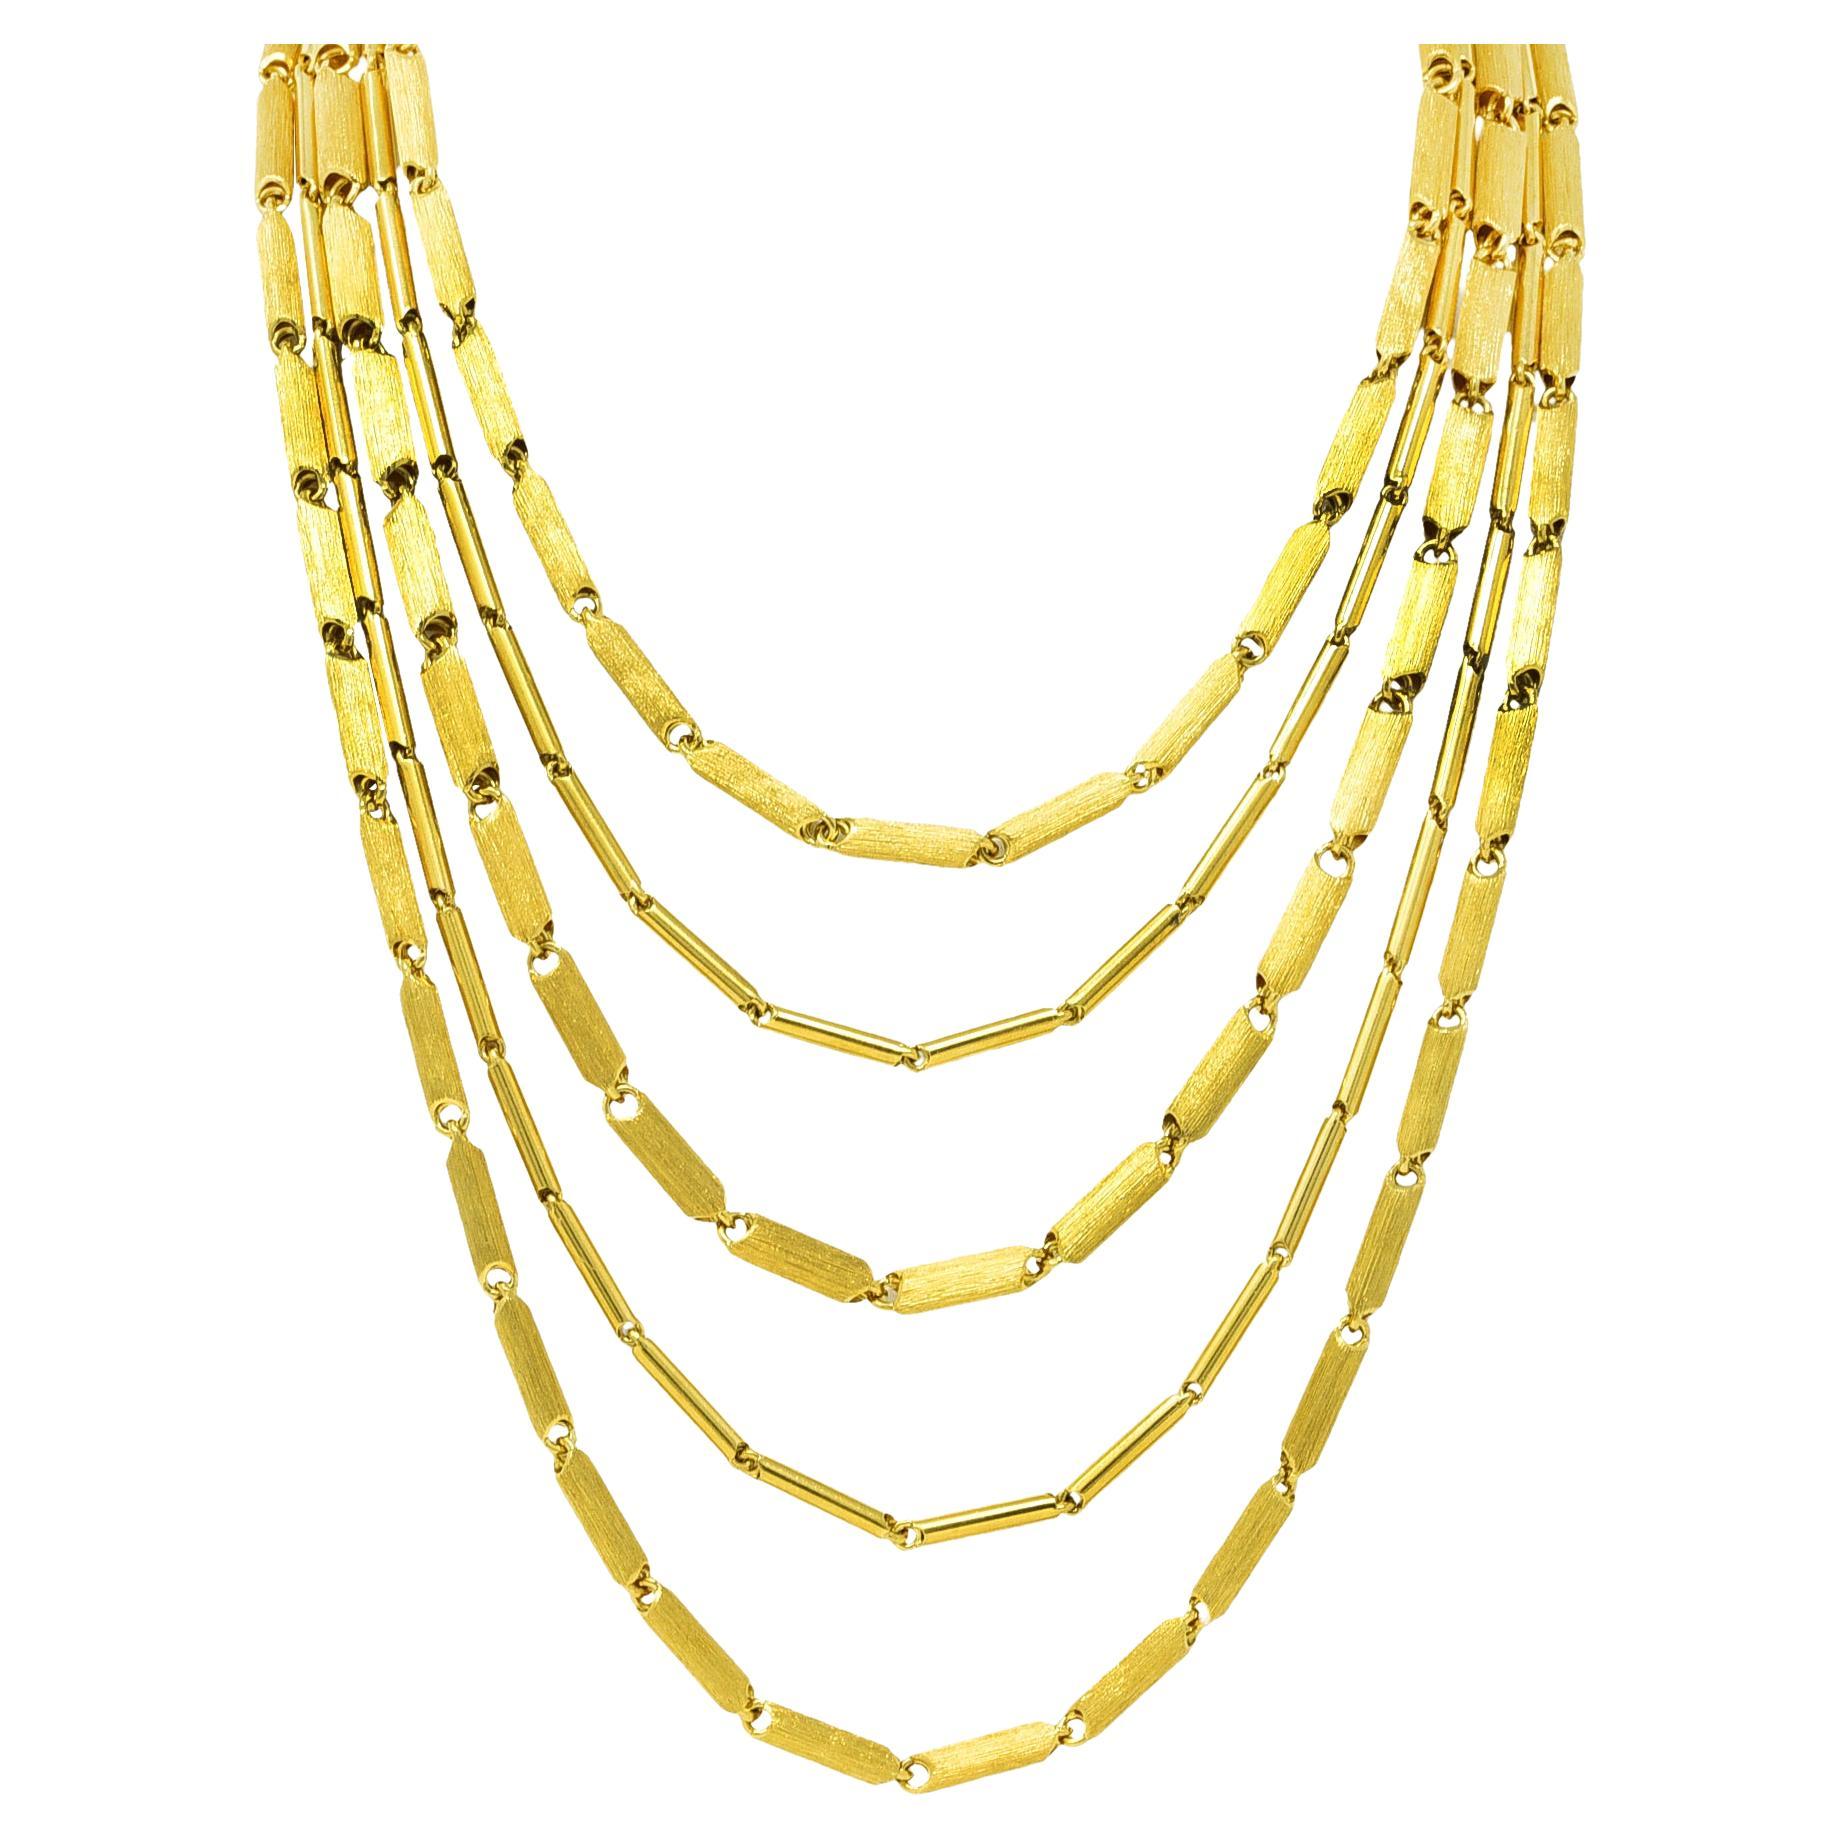 Henry Dunay 18 Karat Yellow Gold Multi-Strand Chain Link Vintage Necklace